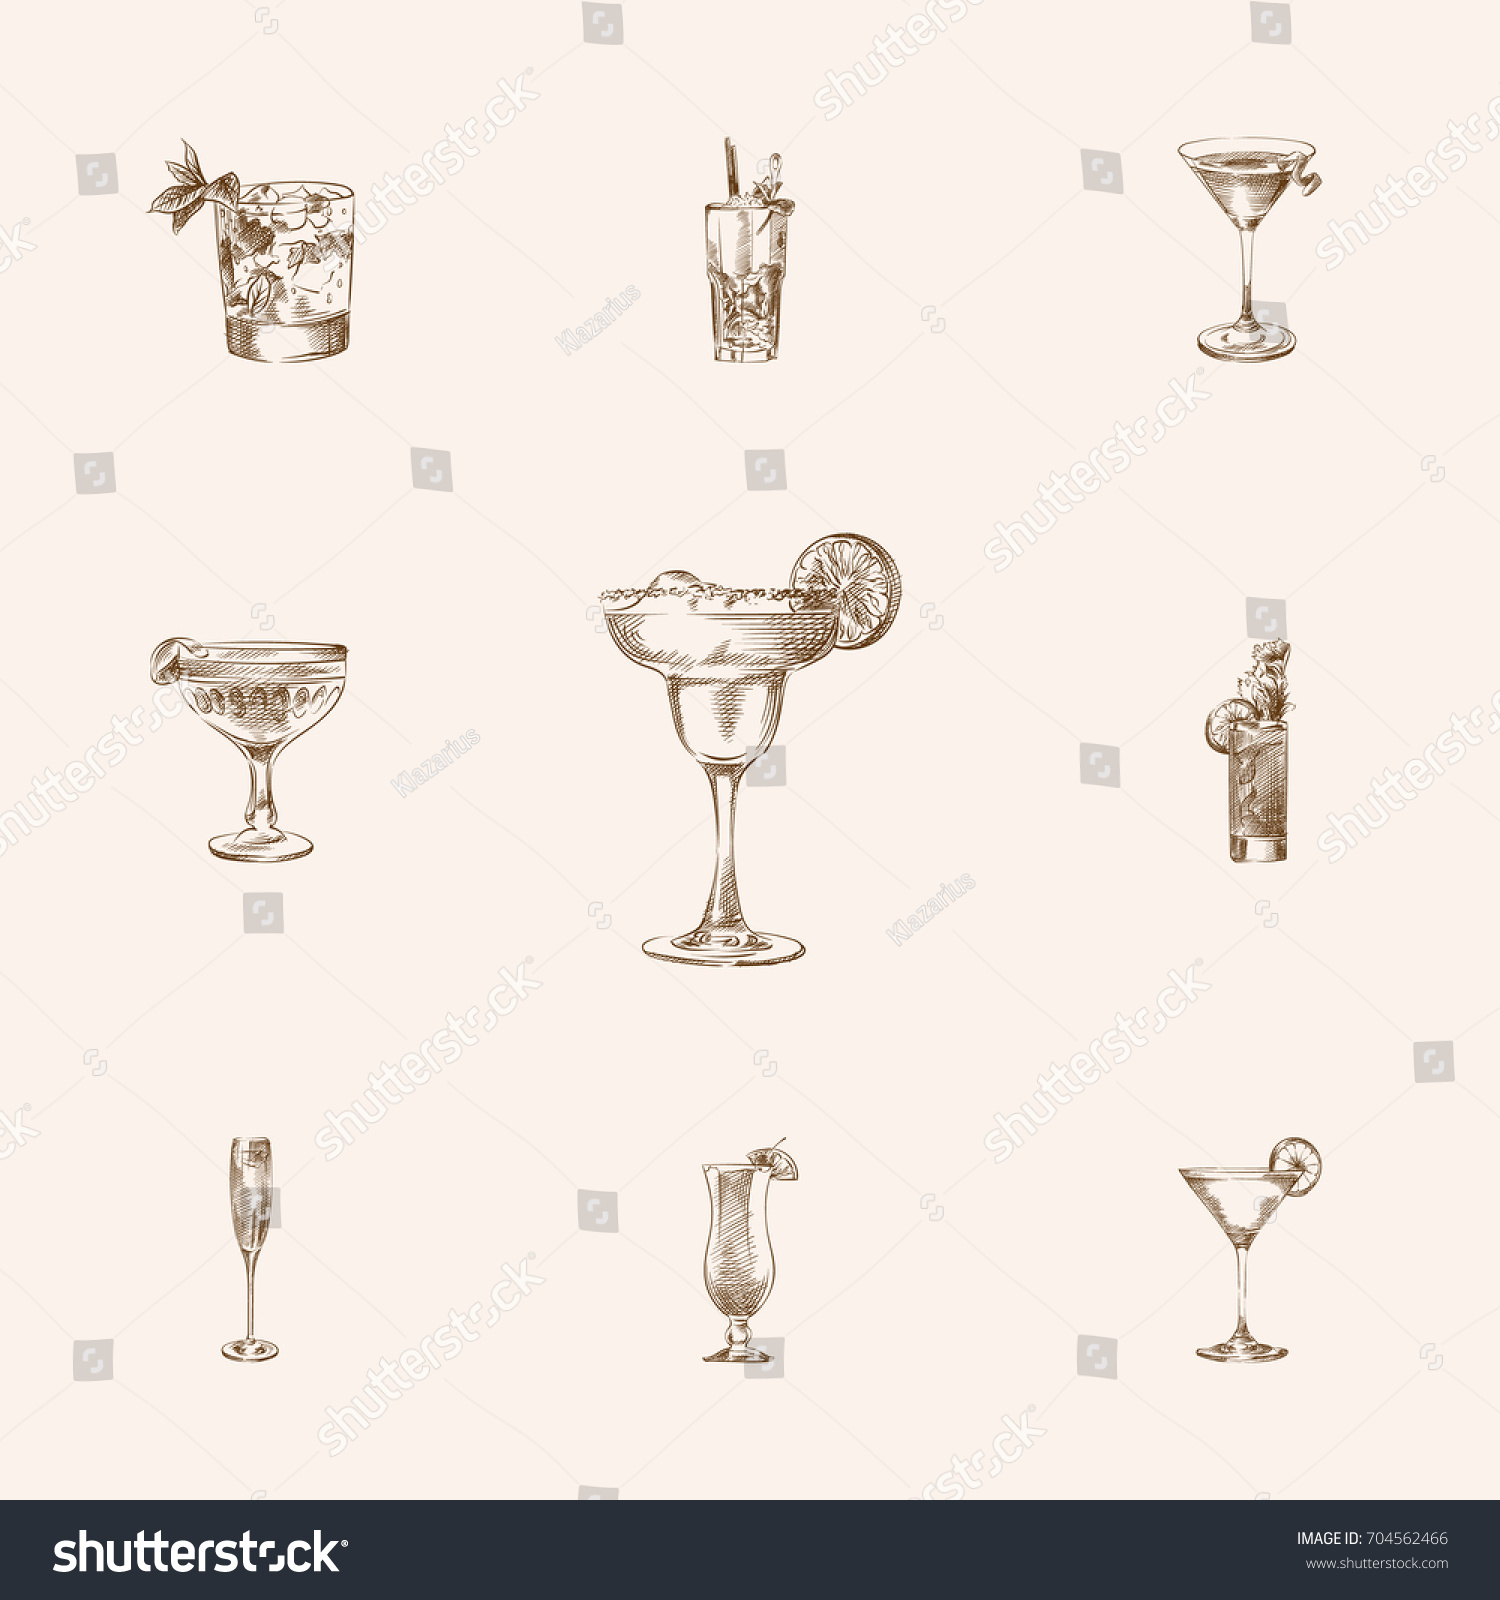 Hand Drawn Cocktail Sketches Set Collection Stock Vector Royalty Free 704562466,Pulled Pork Tenderloin Slow Cooker